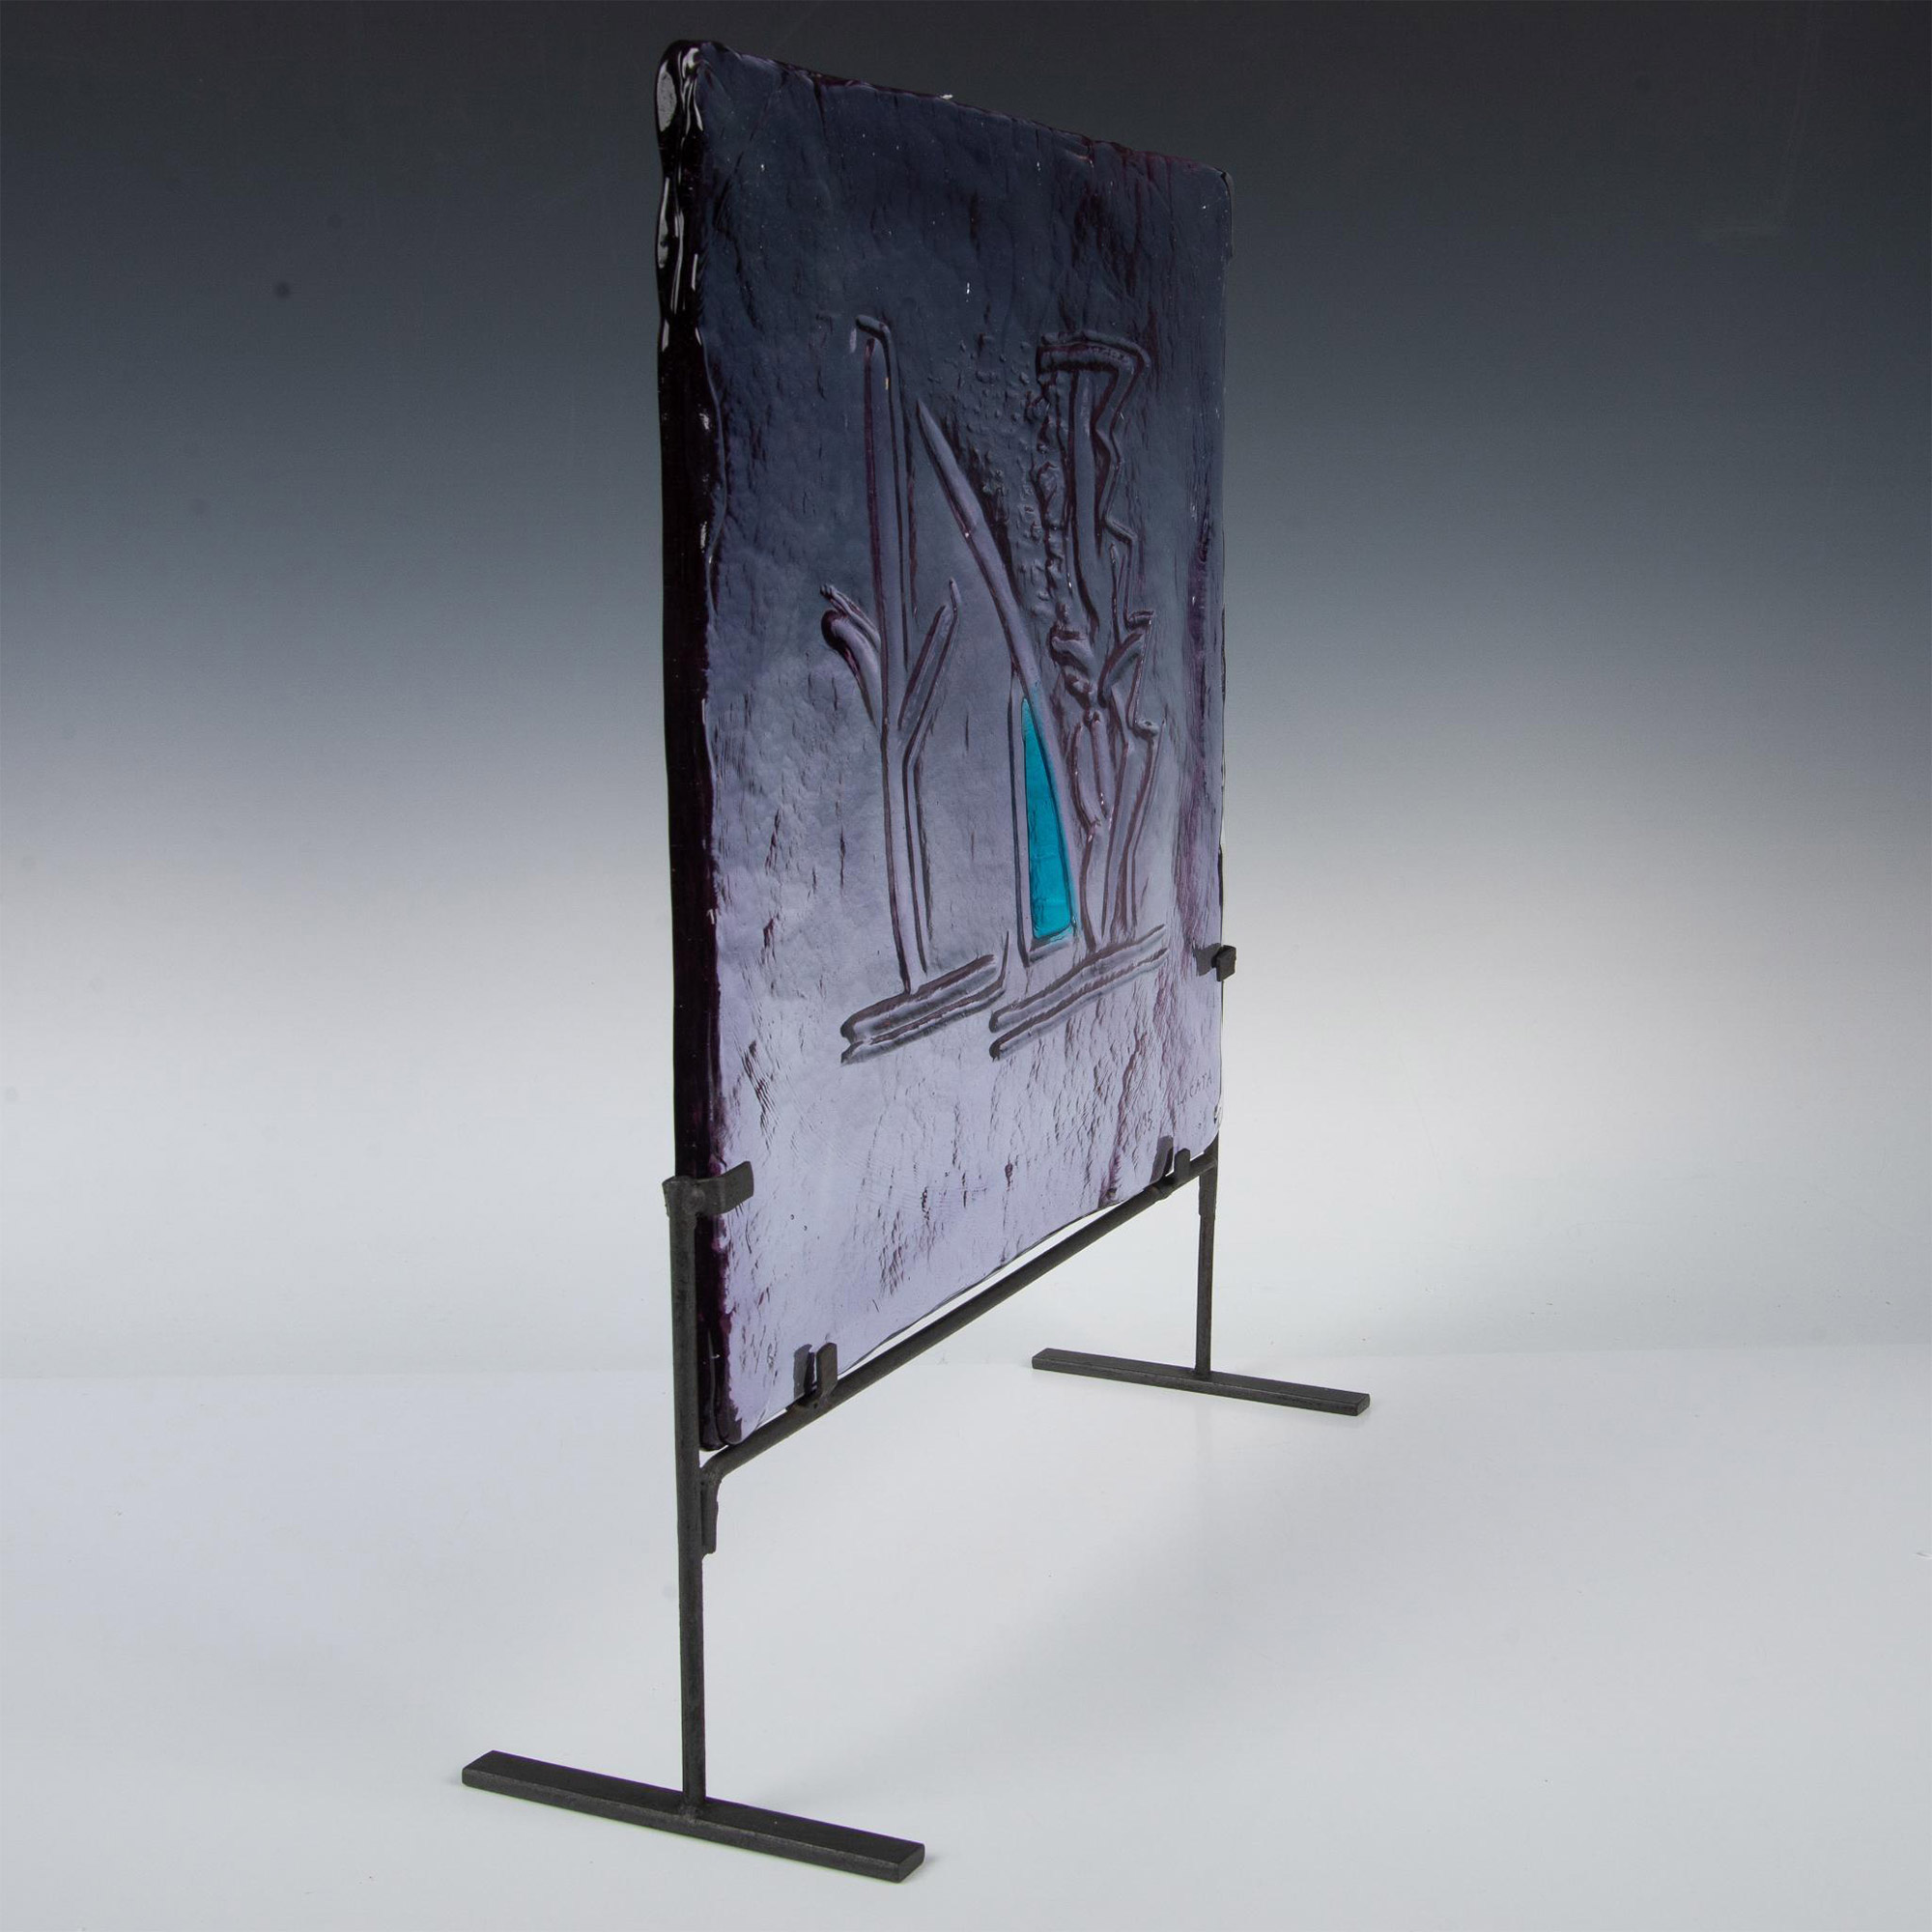 Murano Riccardo Licata Glass Tile Sculpture with Stand - Image 4 of 8